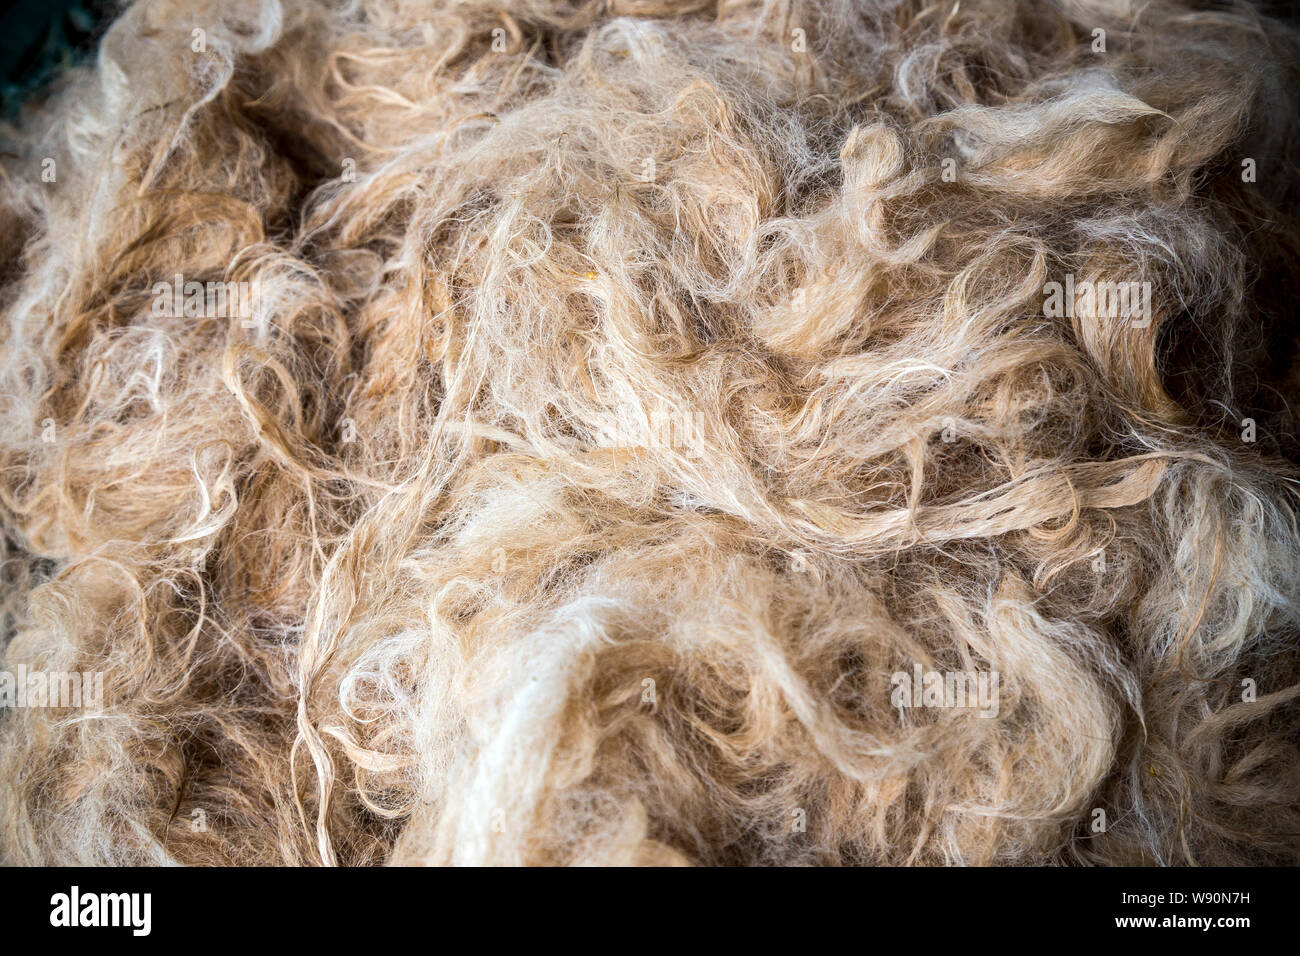 Alpaca wool, Wool, Close-up, Knitting, Abstract, Animal Markings, Art And Craft, Arts Culture and Entertainment, Backdrop - Artificial Scene, Stock Photo